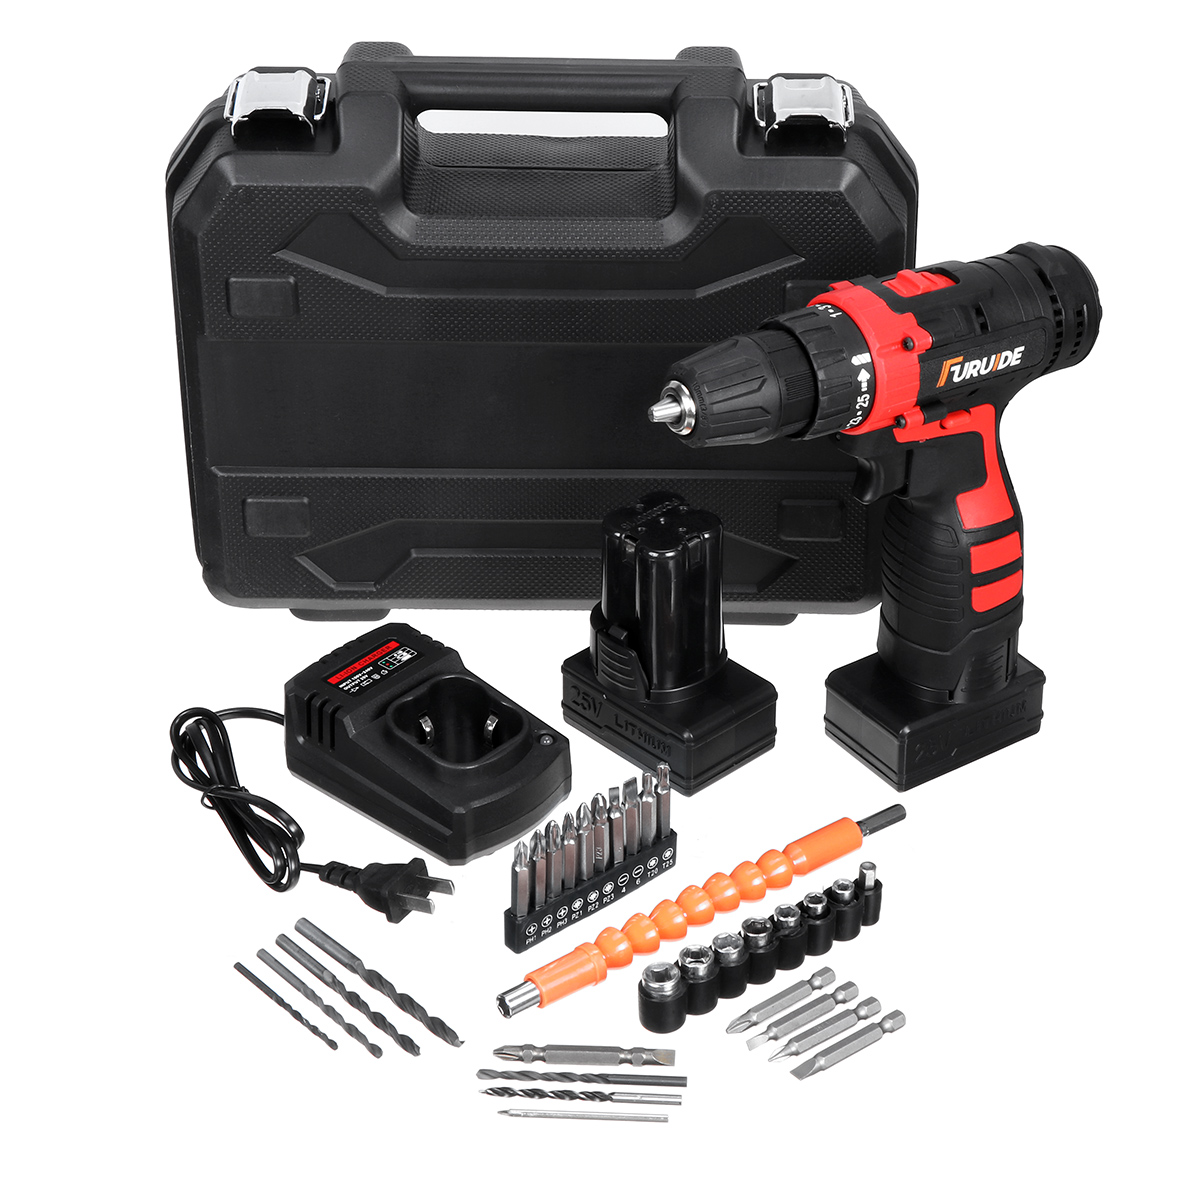 25-V-Drill-2-Speed-Electric-Cordless-Drill-Driver-with-Bits-Set-Batteries-1757270-9